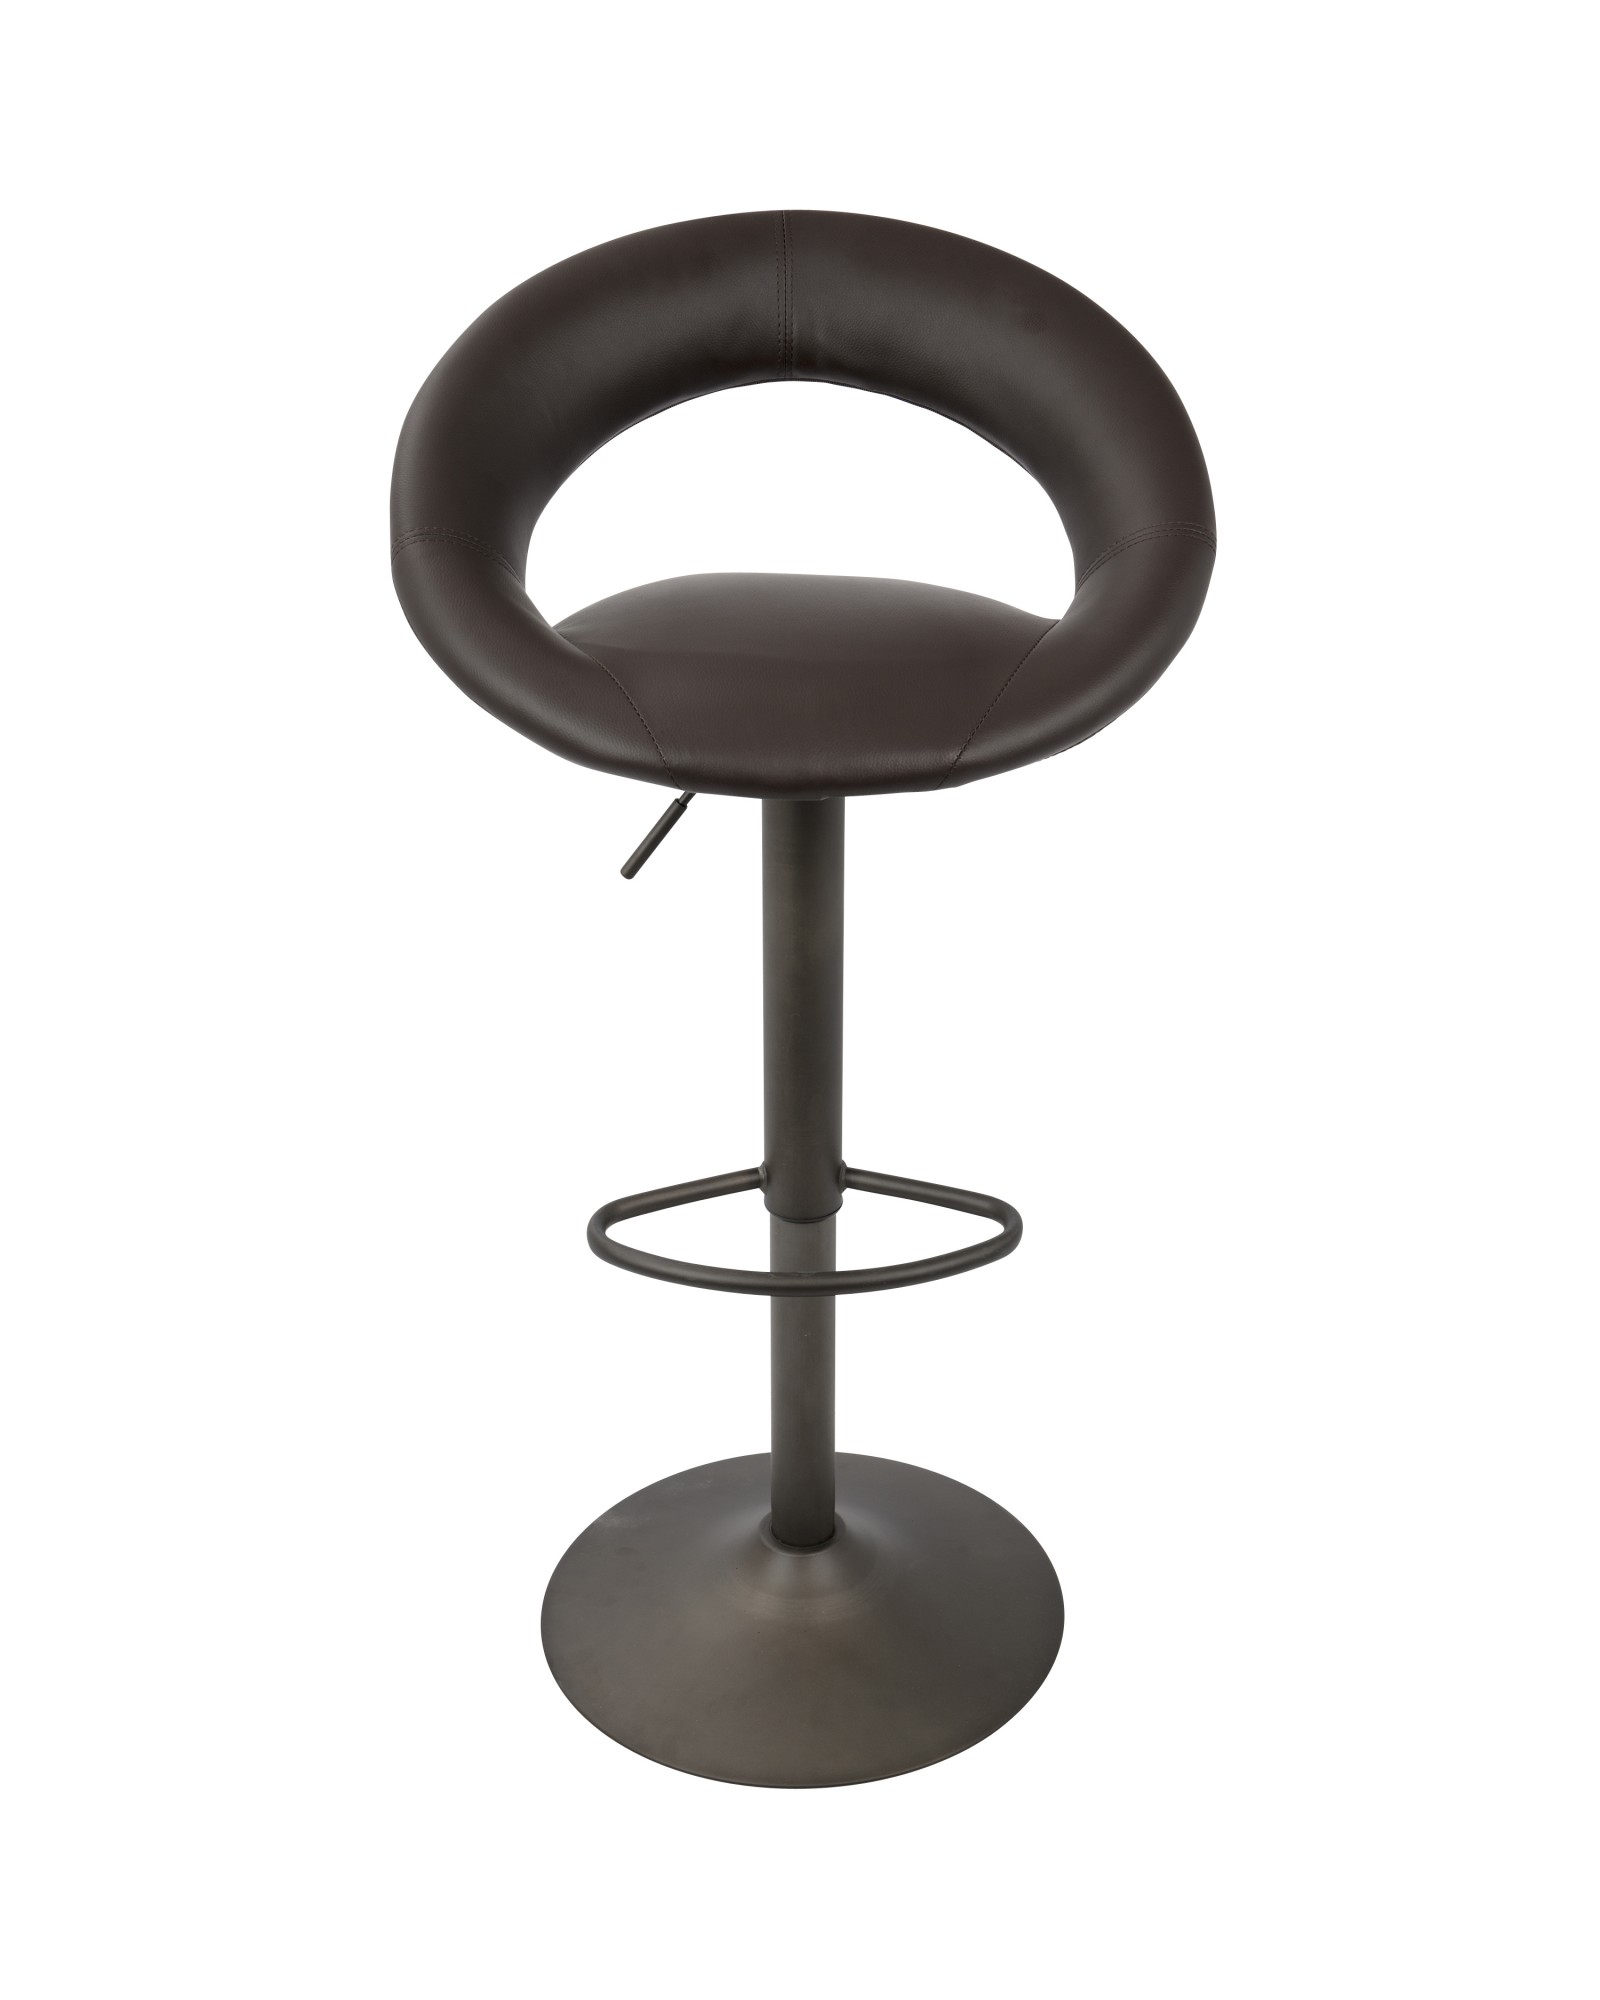 Metro Contemporary Adjustable Barstool in Antique with Brown Faux Leather - Set of 2